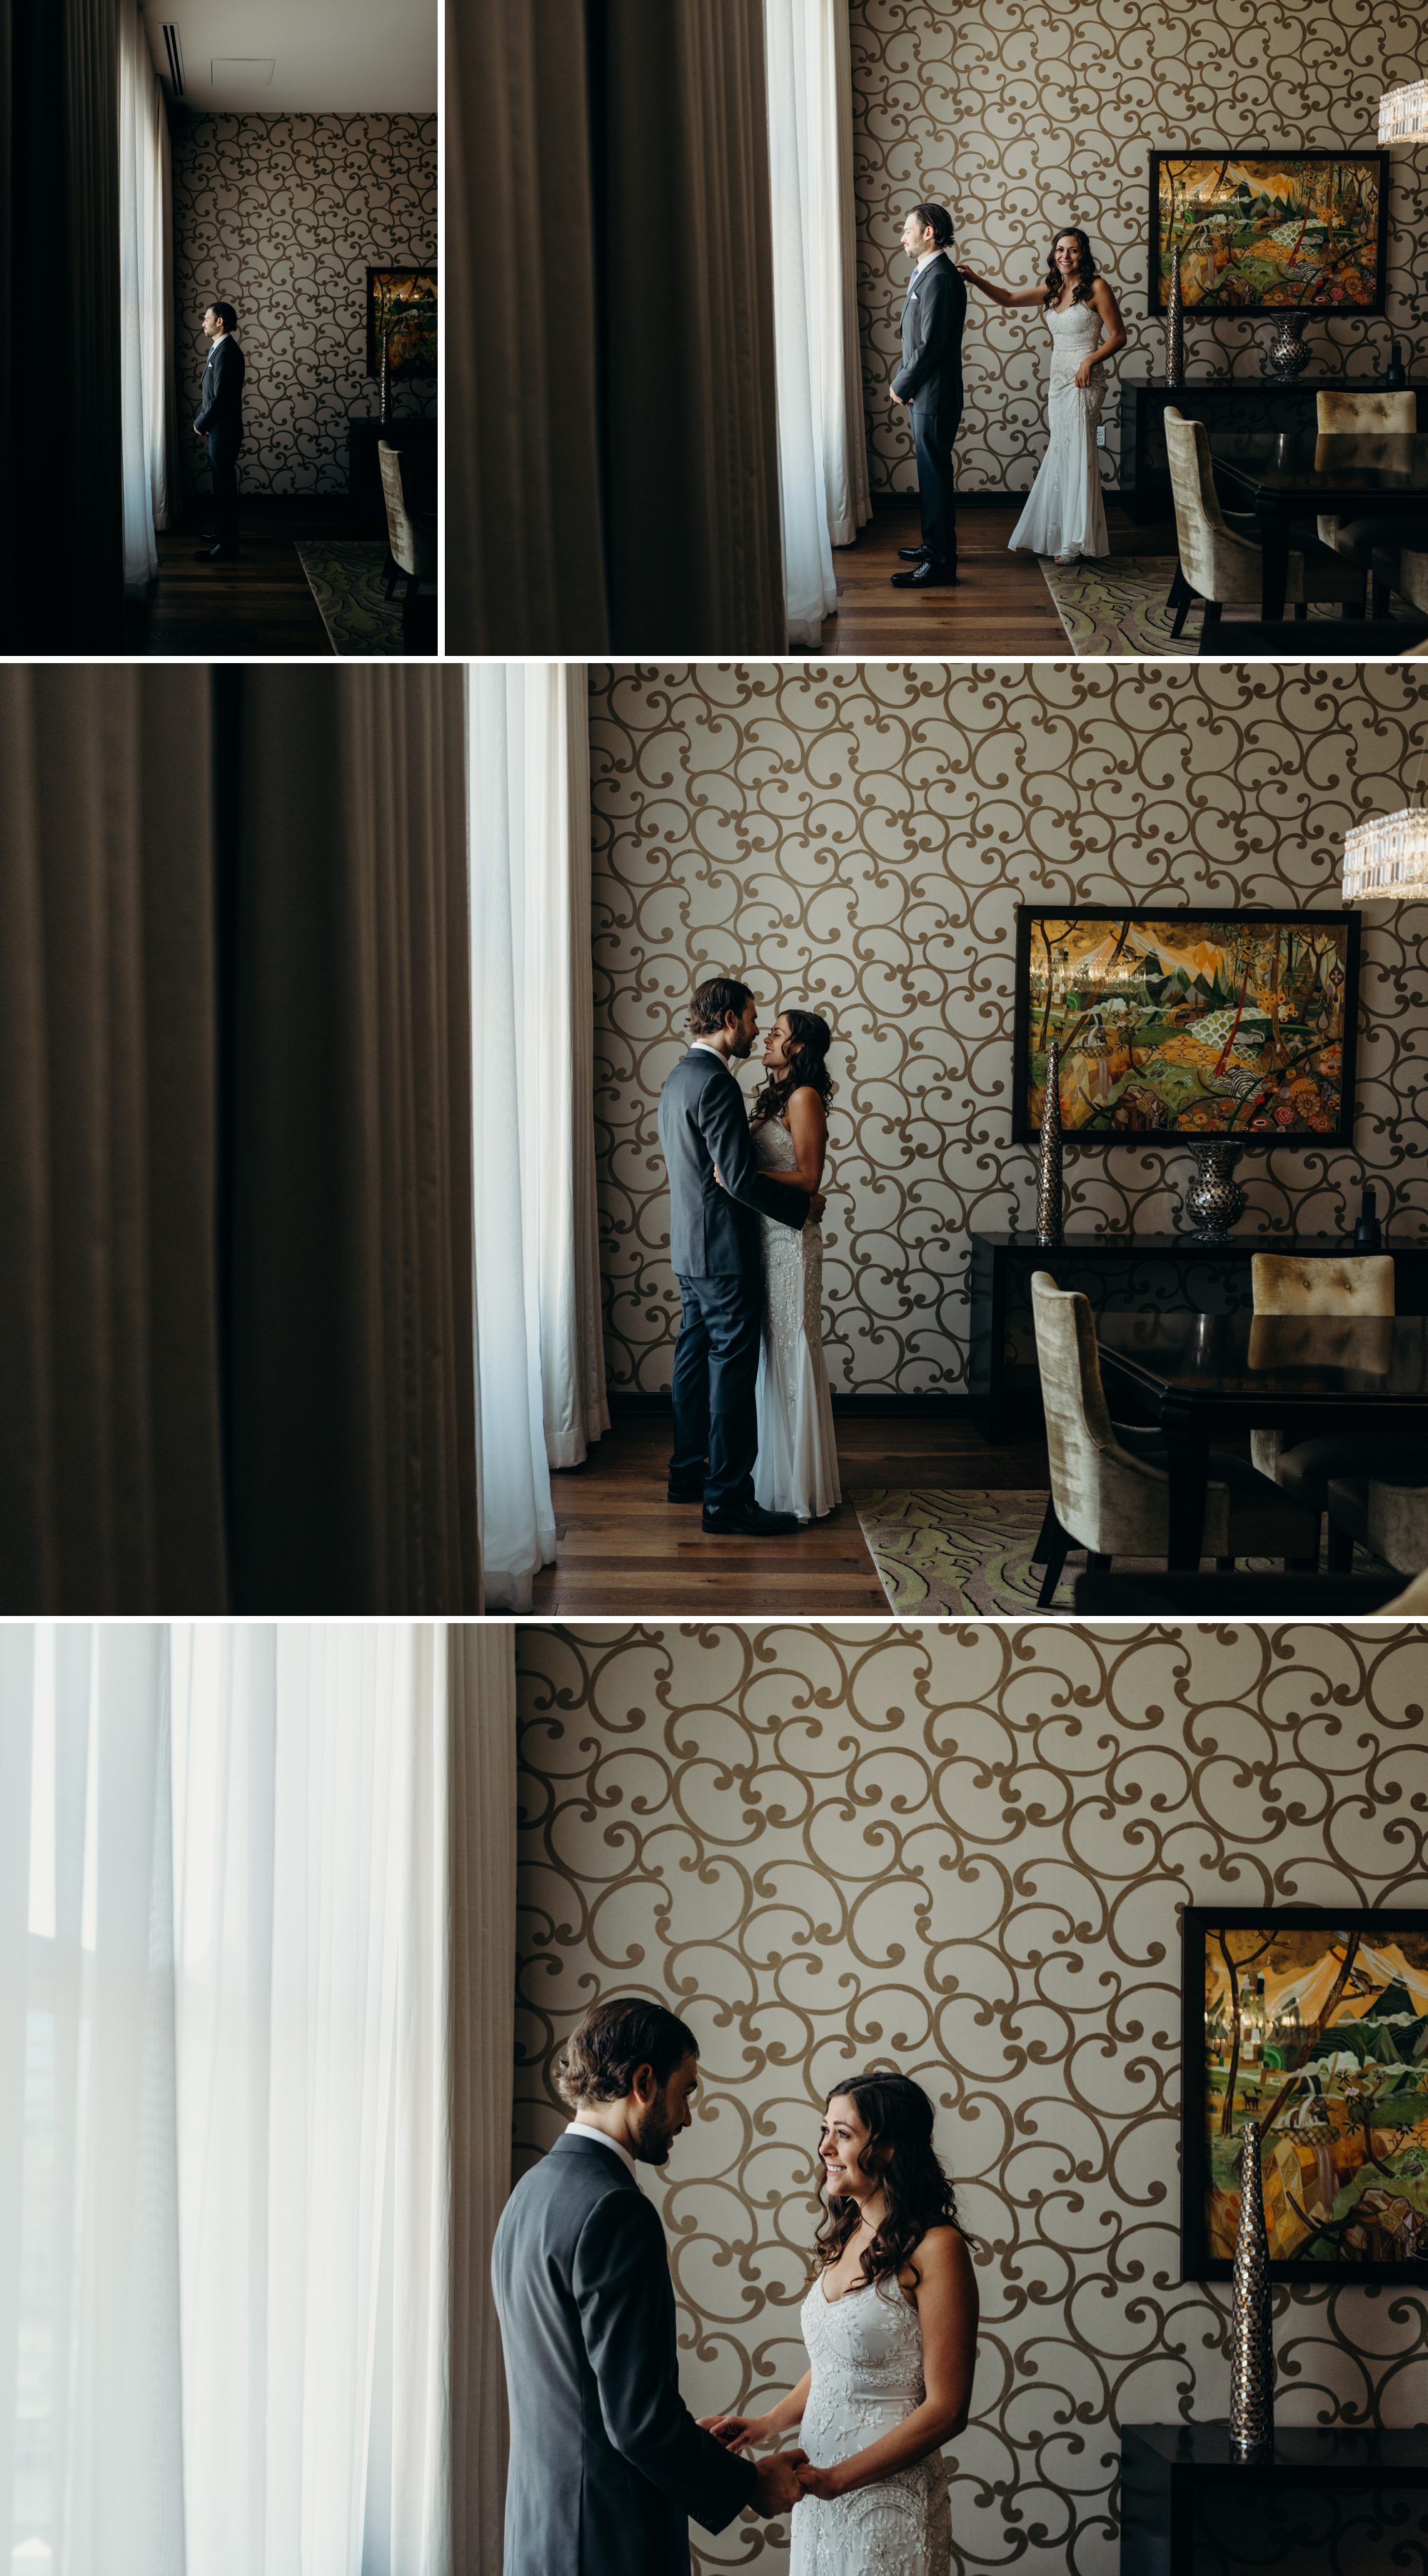 A bride and groom's first look in their hotel room. By Plaza del Toro wedding photographer Briana Morrison.